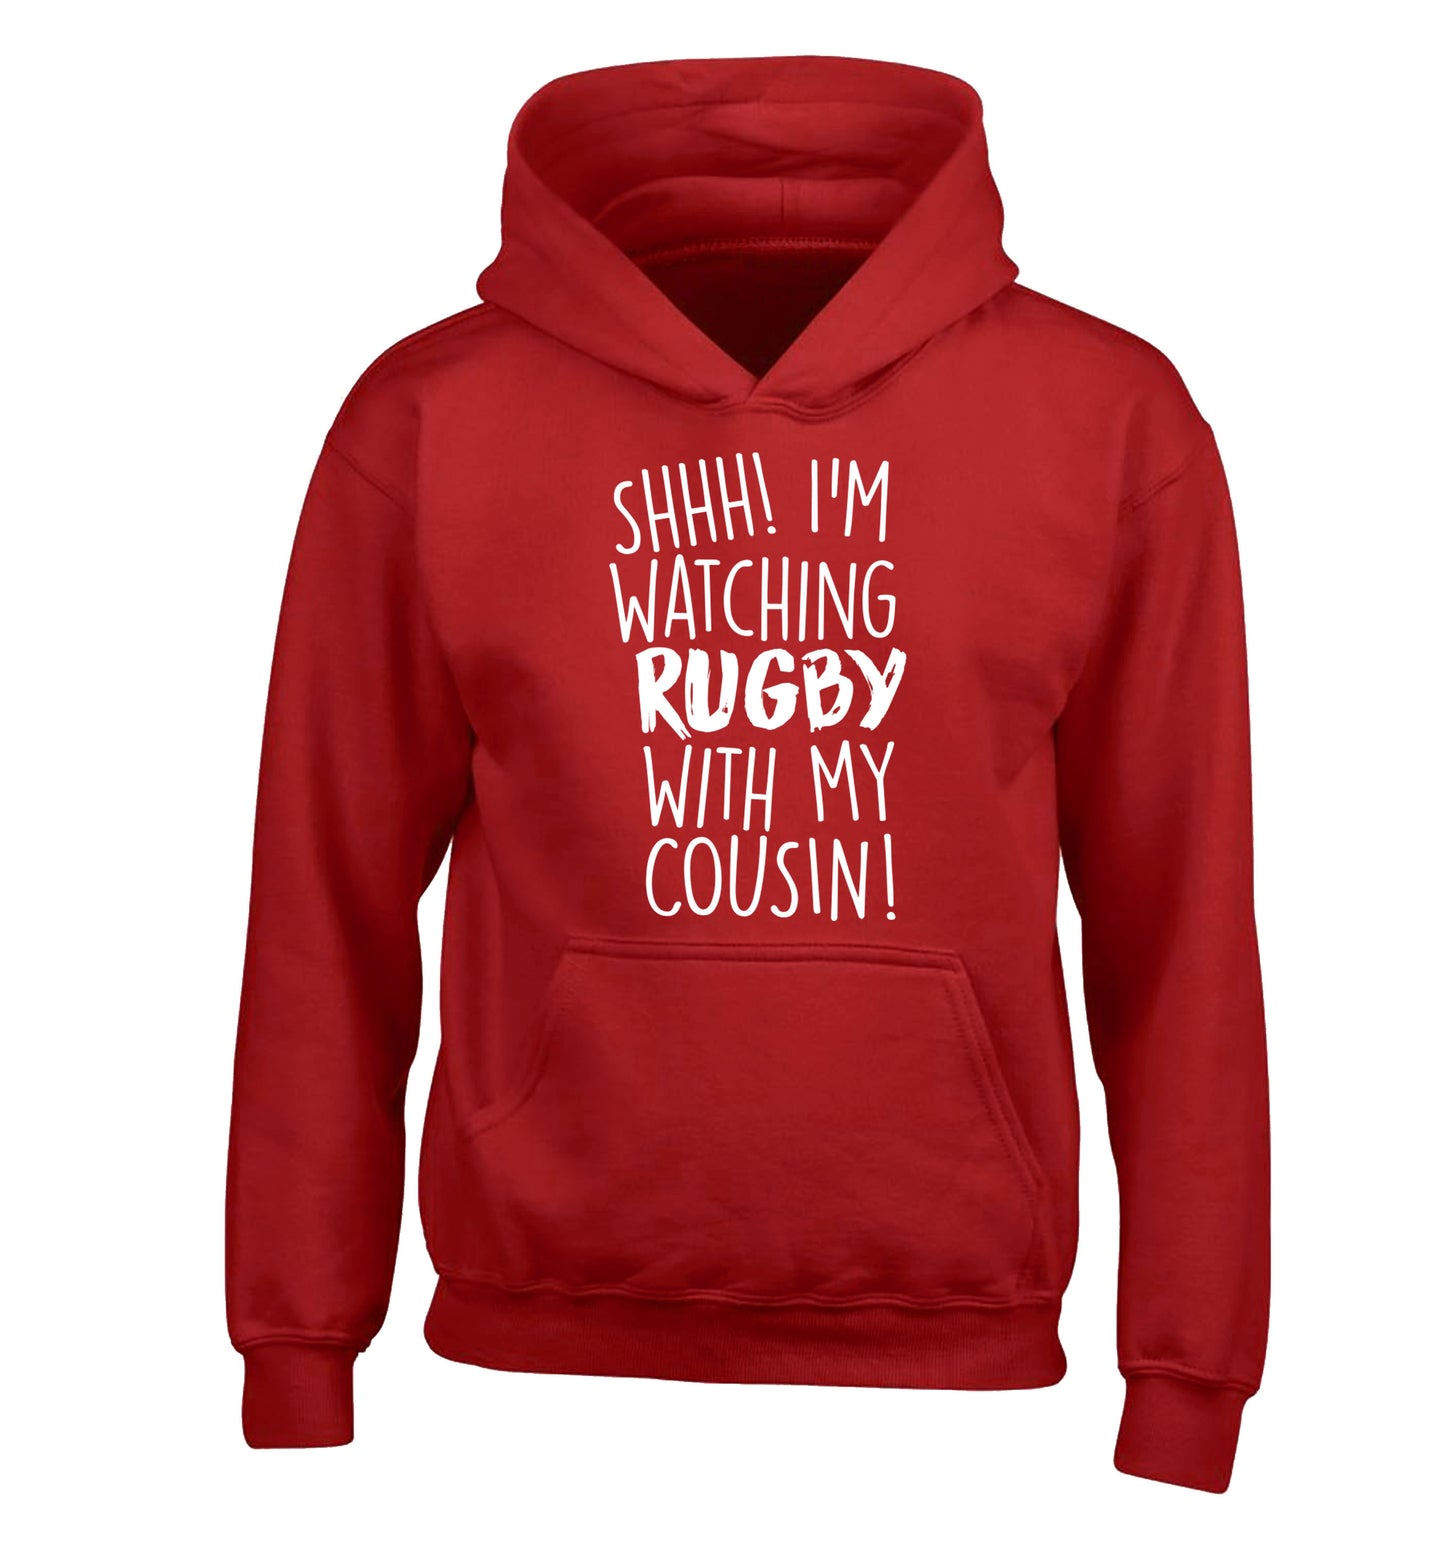 Shhh I'm watching rugby with my cousin children's red hoodie 12-13 Years